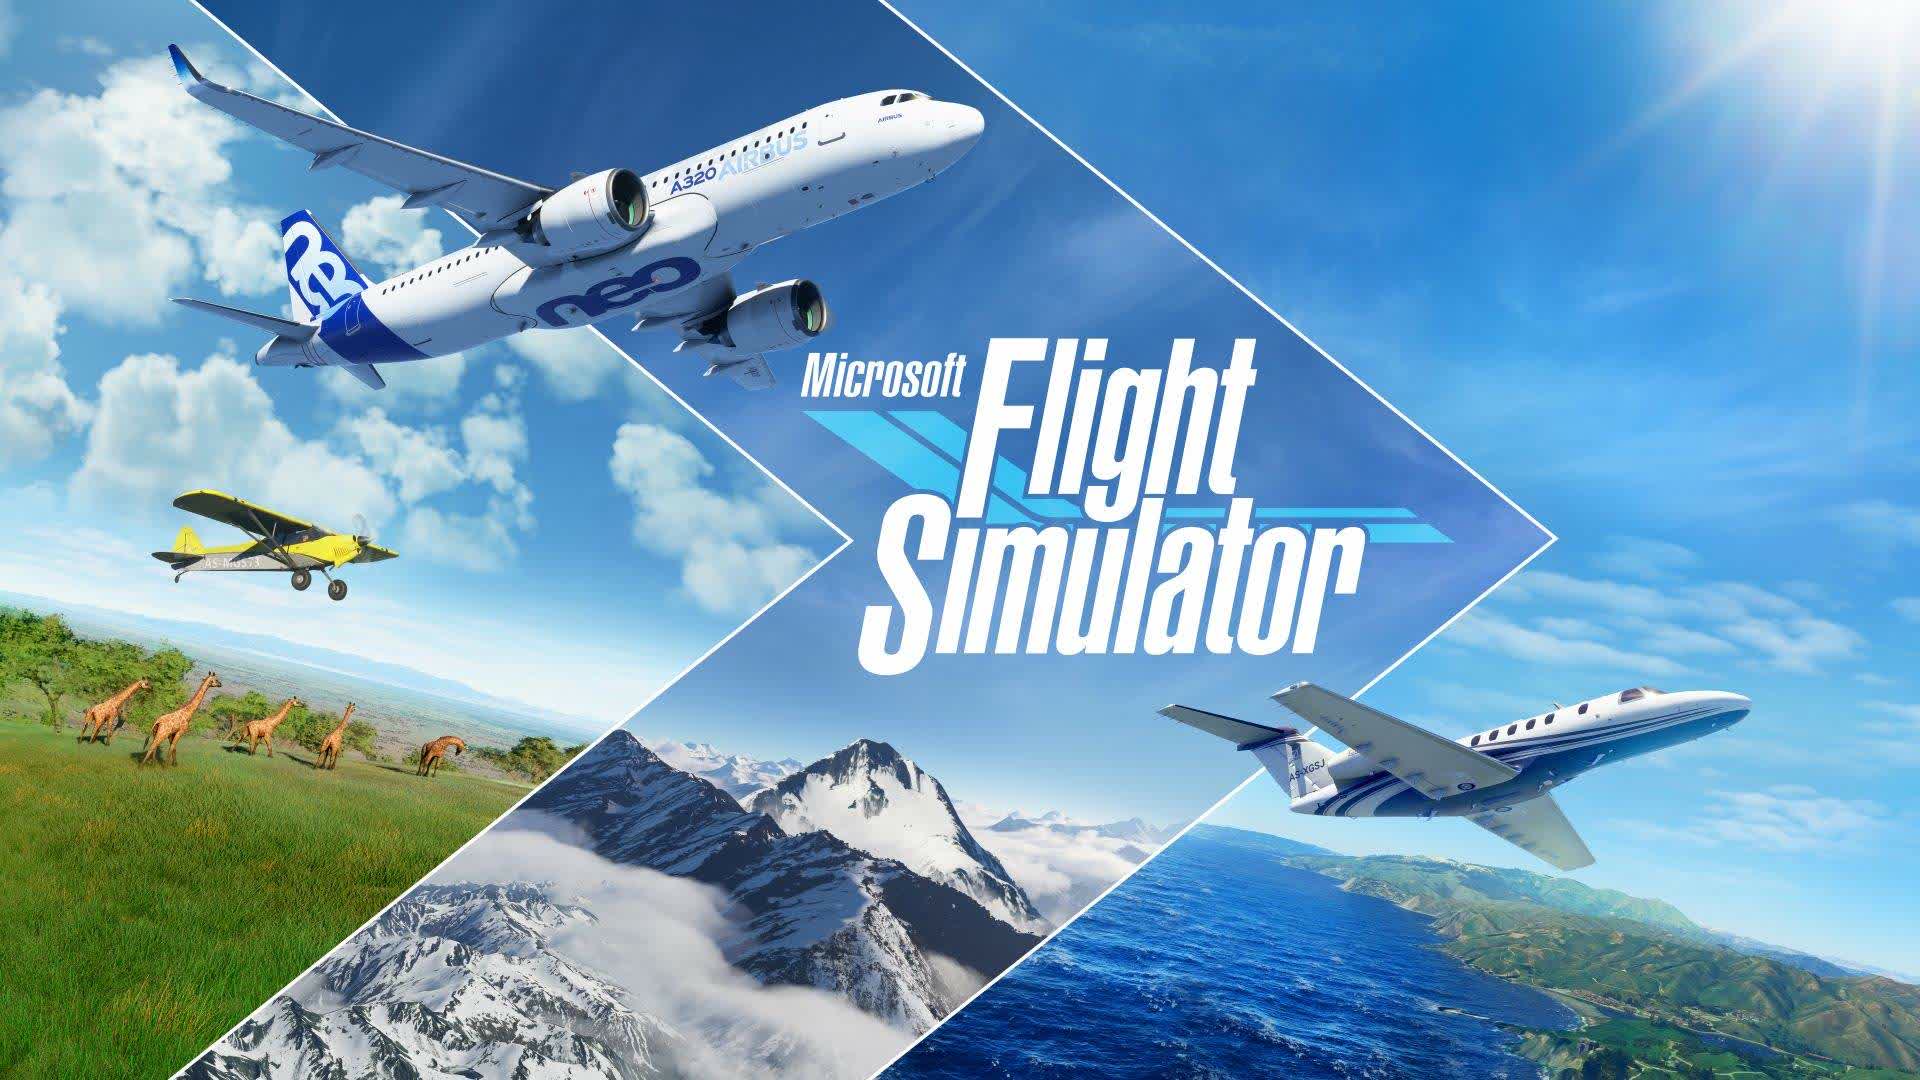 Microsoft Flight Simulator Game of the Year Edition lands on November 18 with DX12 support